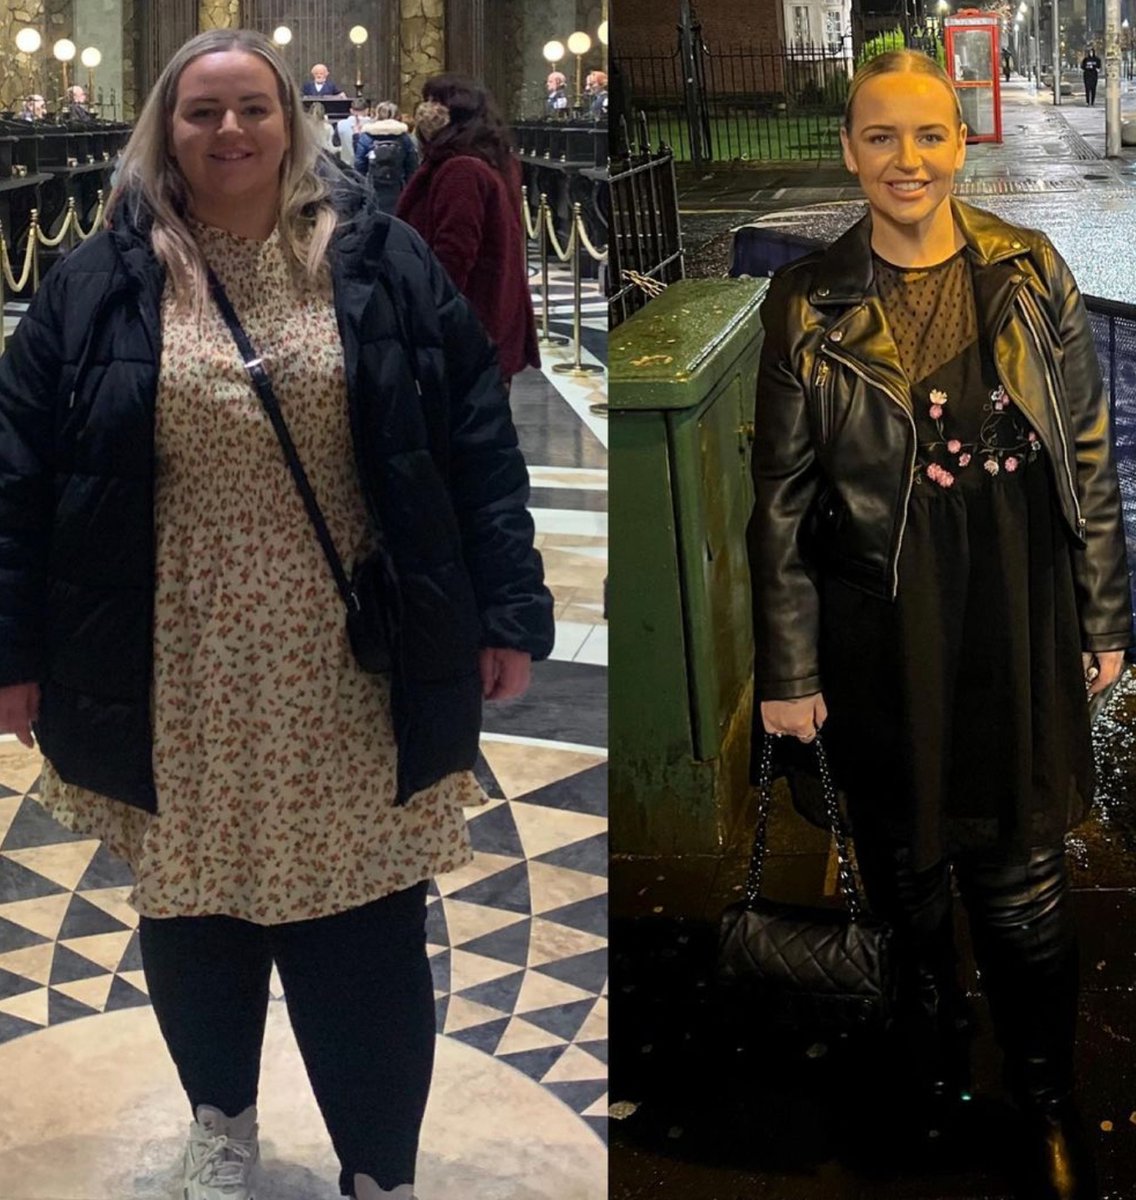 REPOST @wlswithkatiehannah 'In 10 days it marks the 2 year anniversary of the start of my LRD in prep for my gastric bypass surgery. What a journey it’s been! Over 10 stone weight loss....' Inspirational Katie 🎉 #GivingBackLives #BeforeAndAfter